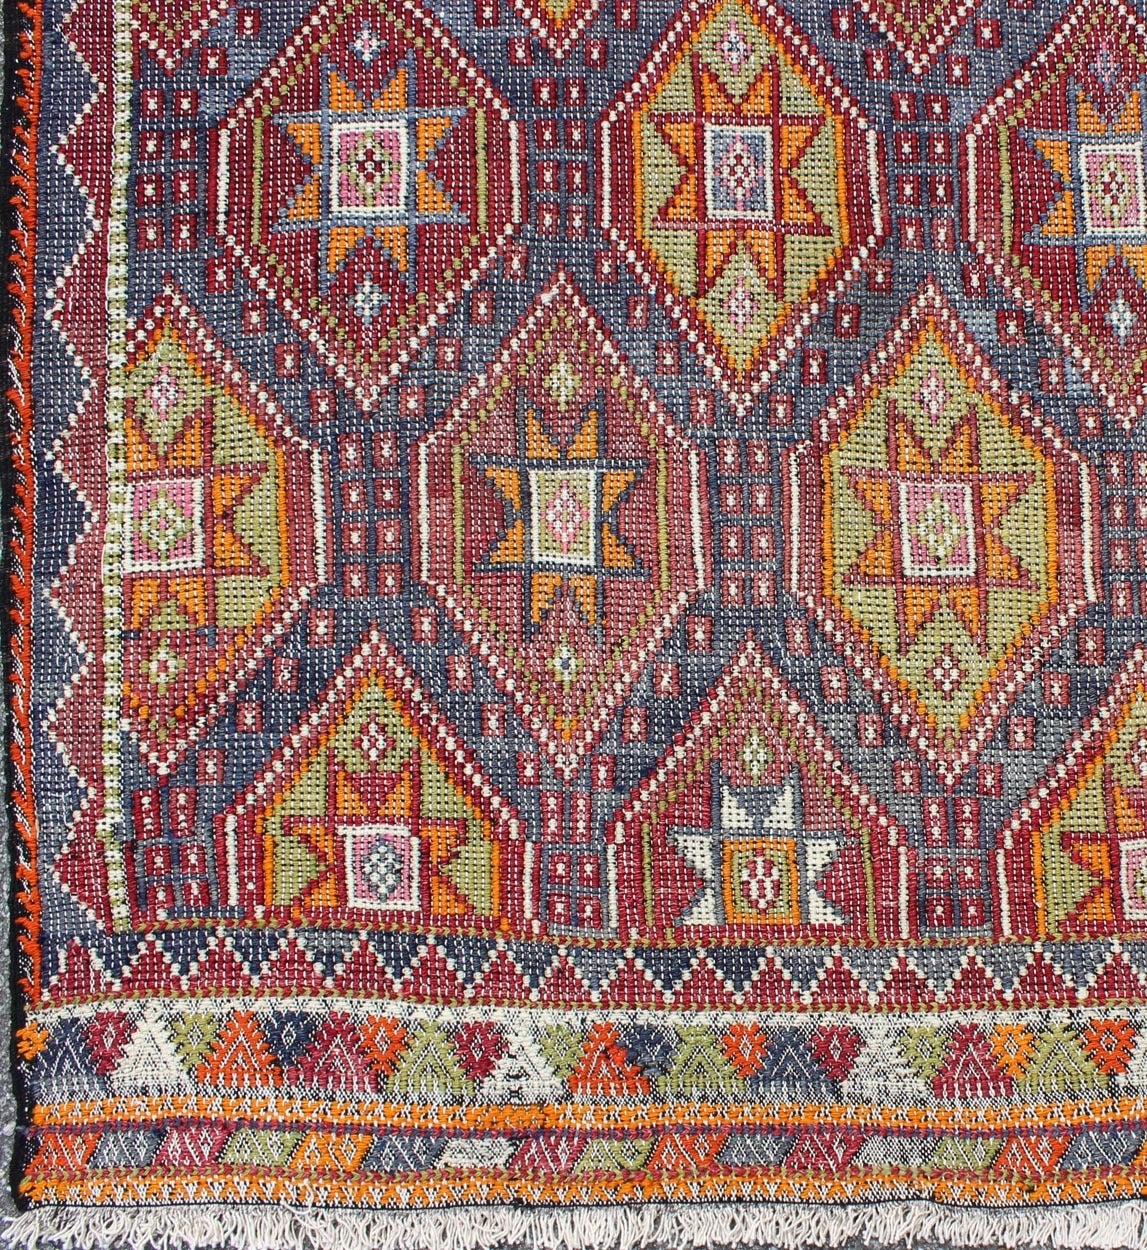 This embroidered flat-weave Jajeem bears a repeating diamond design with star and geometric motifs. Set on a multicolored blue and purple background, the accent colors are light green, red, yellow, orange, cream and brown.
Measures: 6'2 x 9'4.